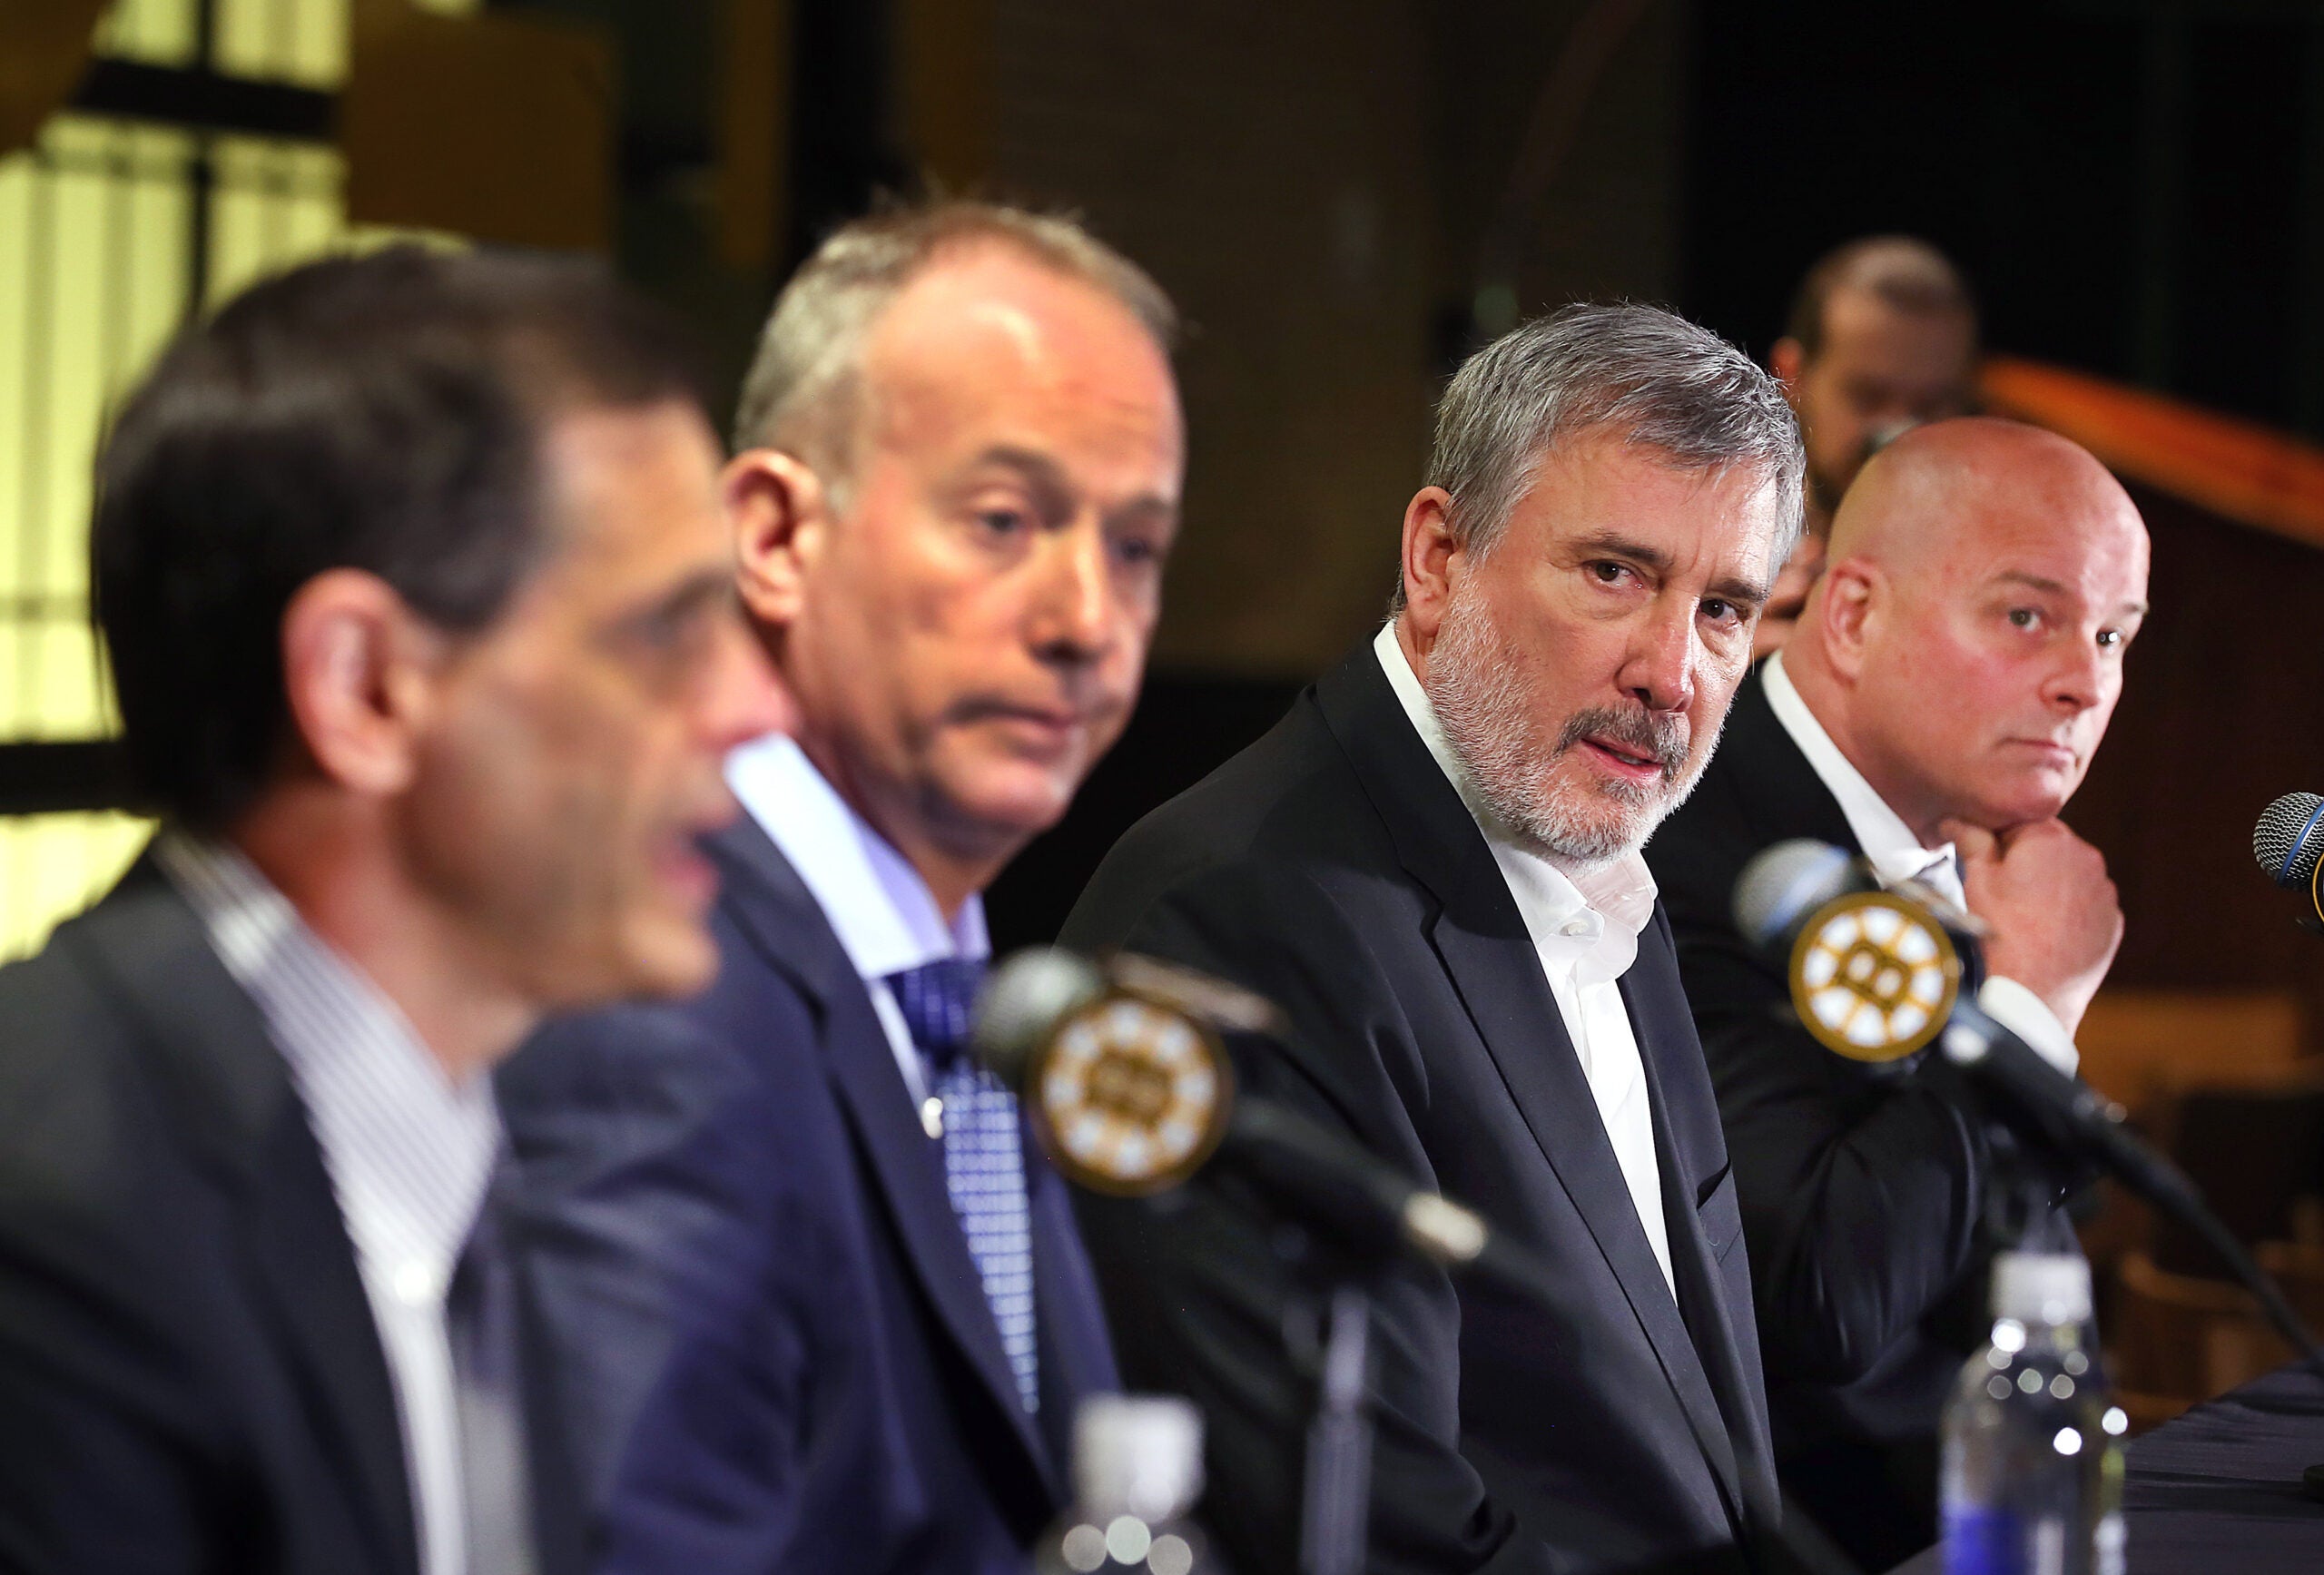 The Boston Bruins GM Don Sweeney, CEO Charlie Jacobs, President Cam Neely and coach Jim Montgomery held an end of season press conference at TD Garden.